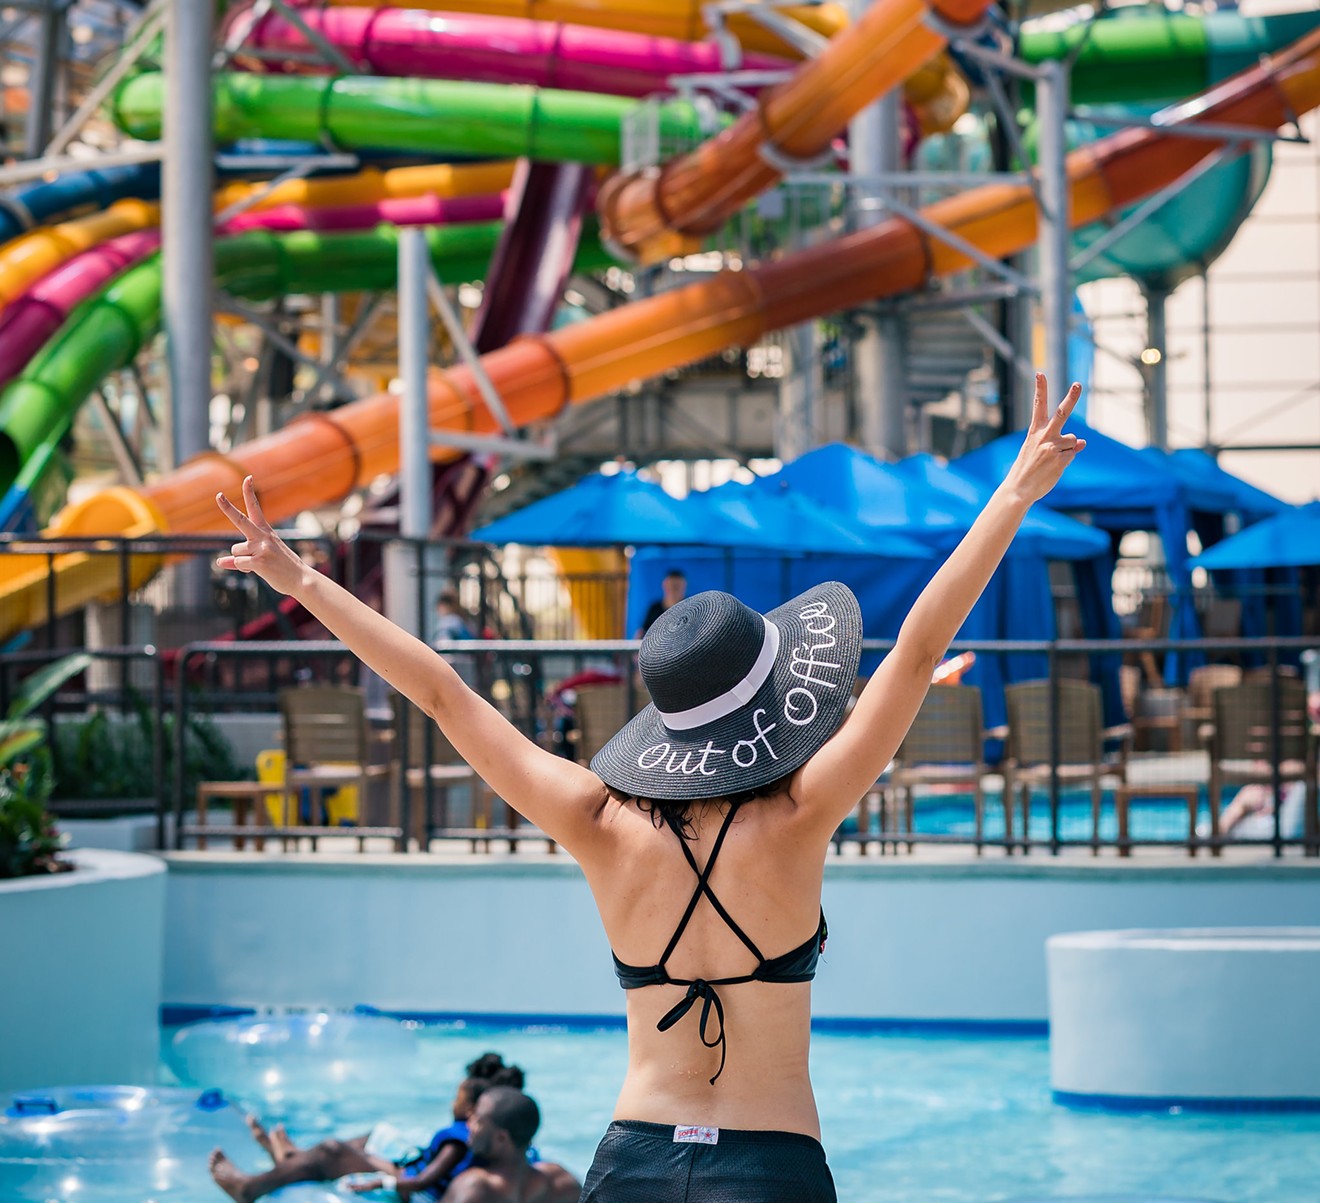 Summer is a state of mind. North Texas has plenty of fun indoors spots to get your mind off the cold.